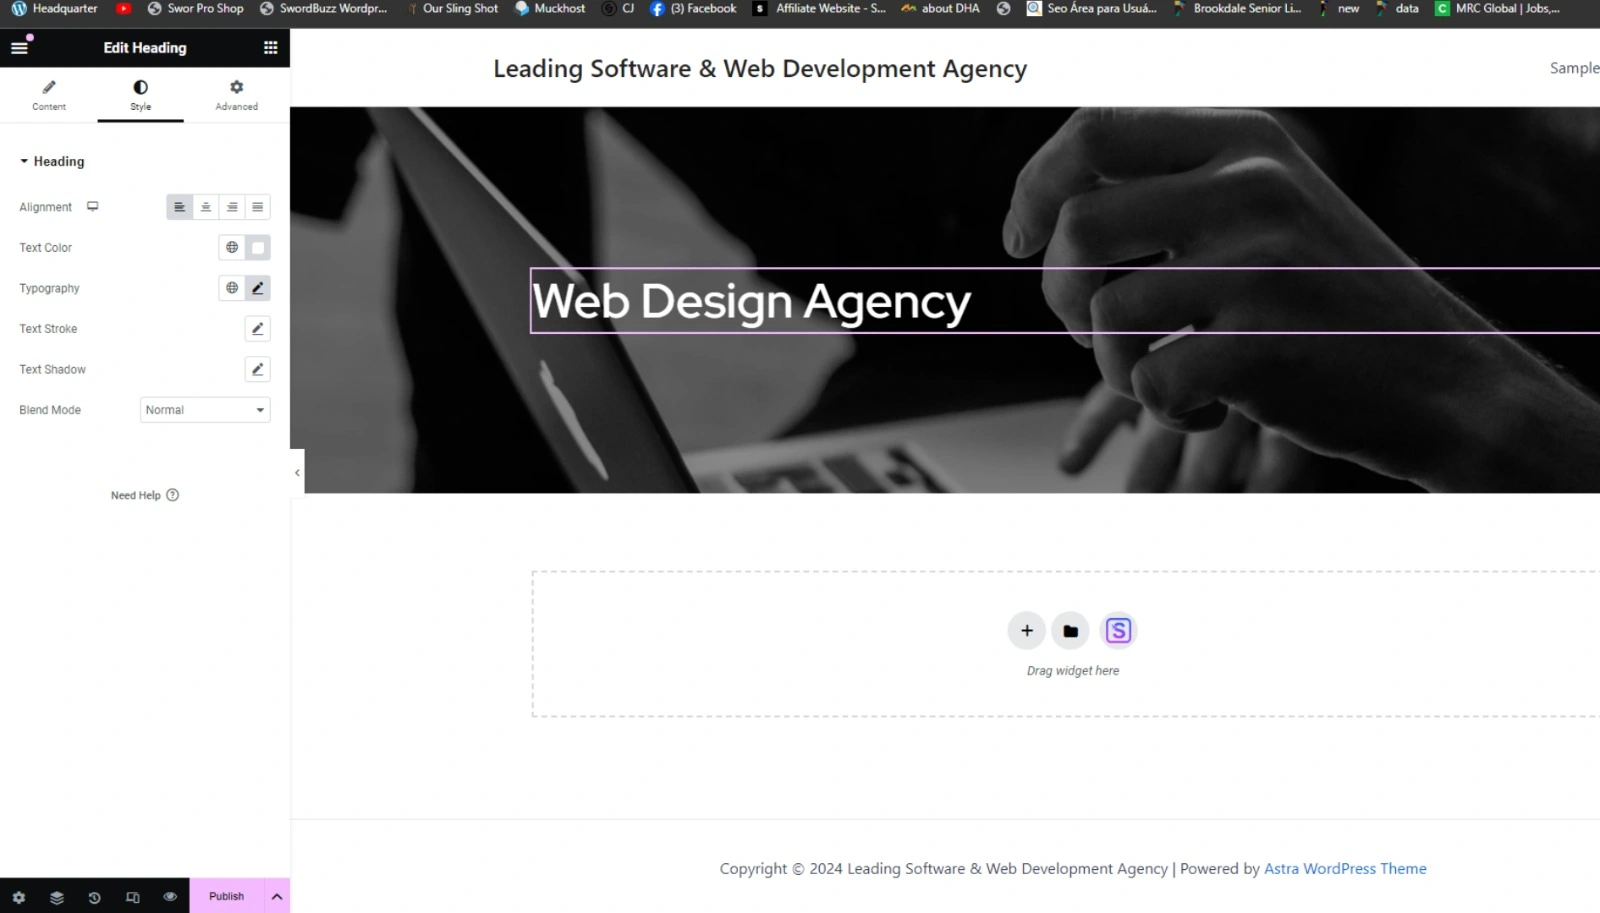 The web design agency shines in the browser.